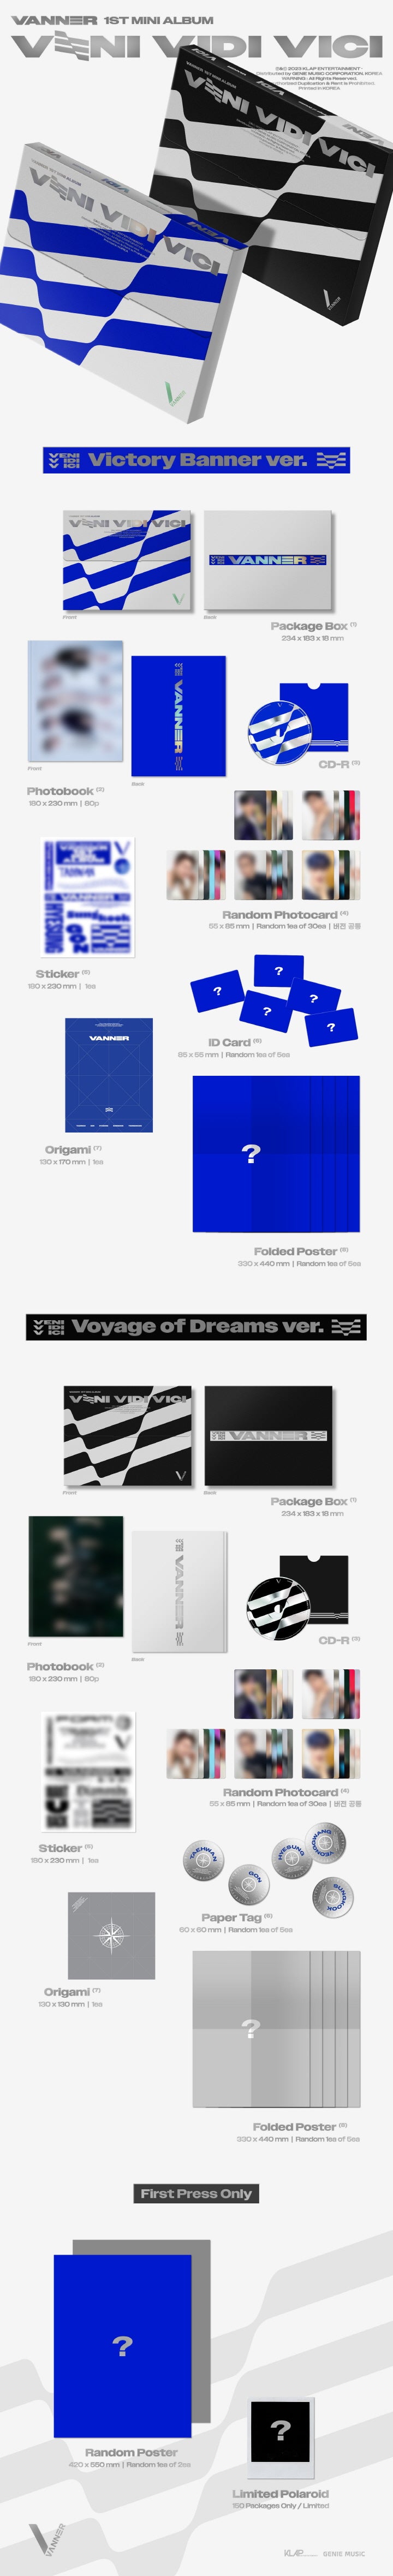 1 CD
1 Photo Book (80 pages)
1 Random Photo Card (random out of 30 types)
1 Sticker
1 Paper Tag (random out of 5 types)
1 ...